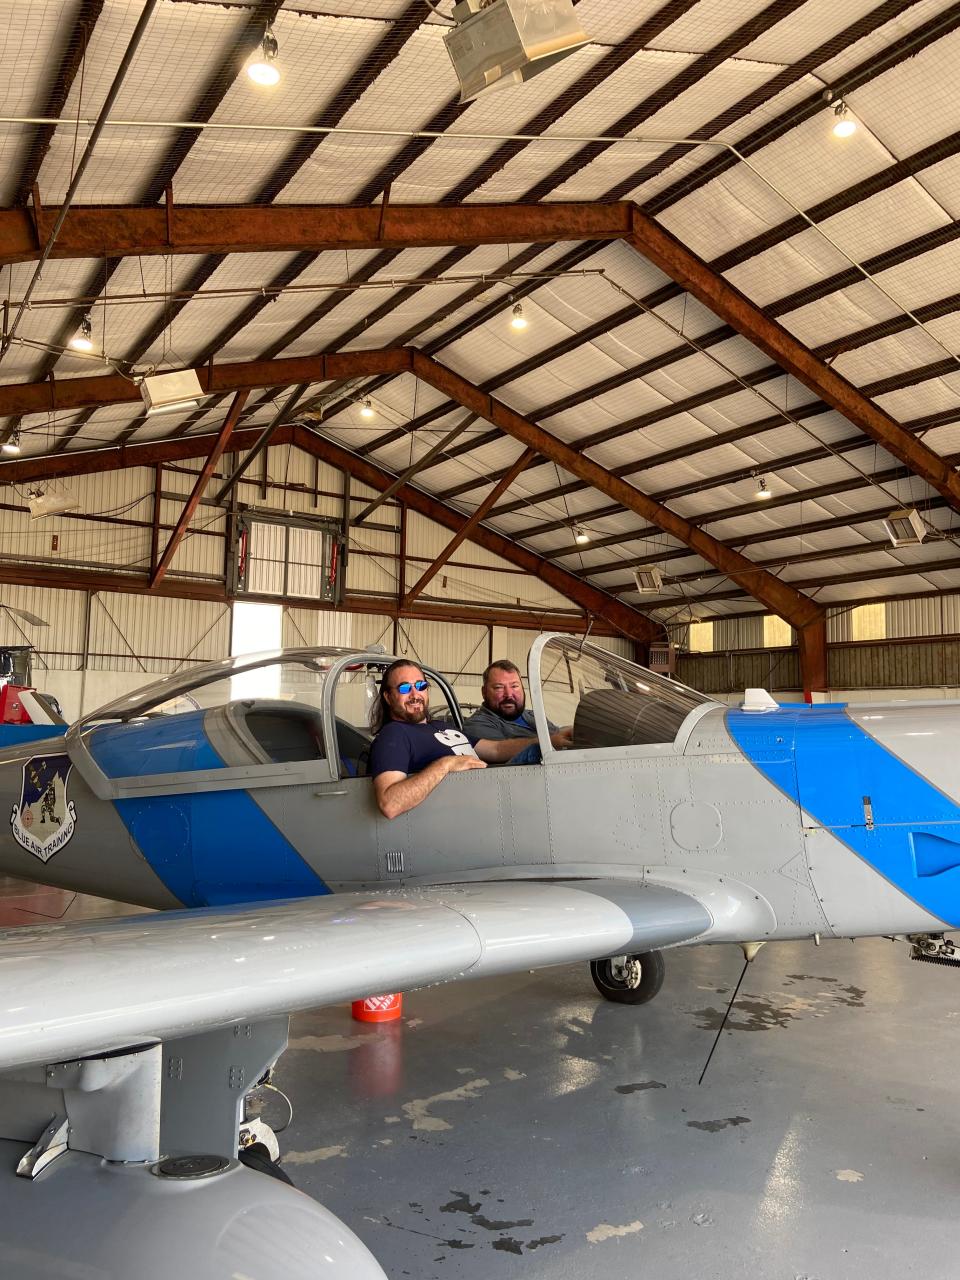 Brandon Goldsmith, president River Valley Film Society and John Wright, director of Blue Air Training, sit together in a plane inside the airplane hangar.